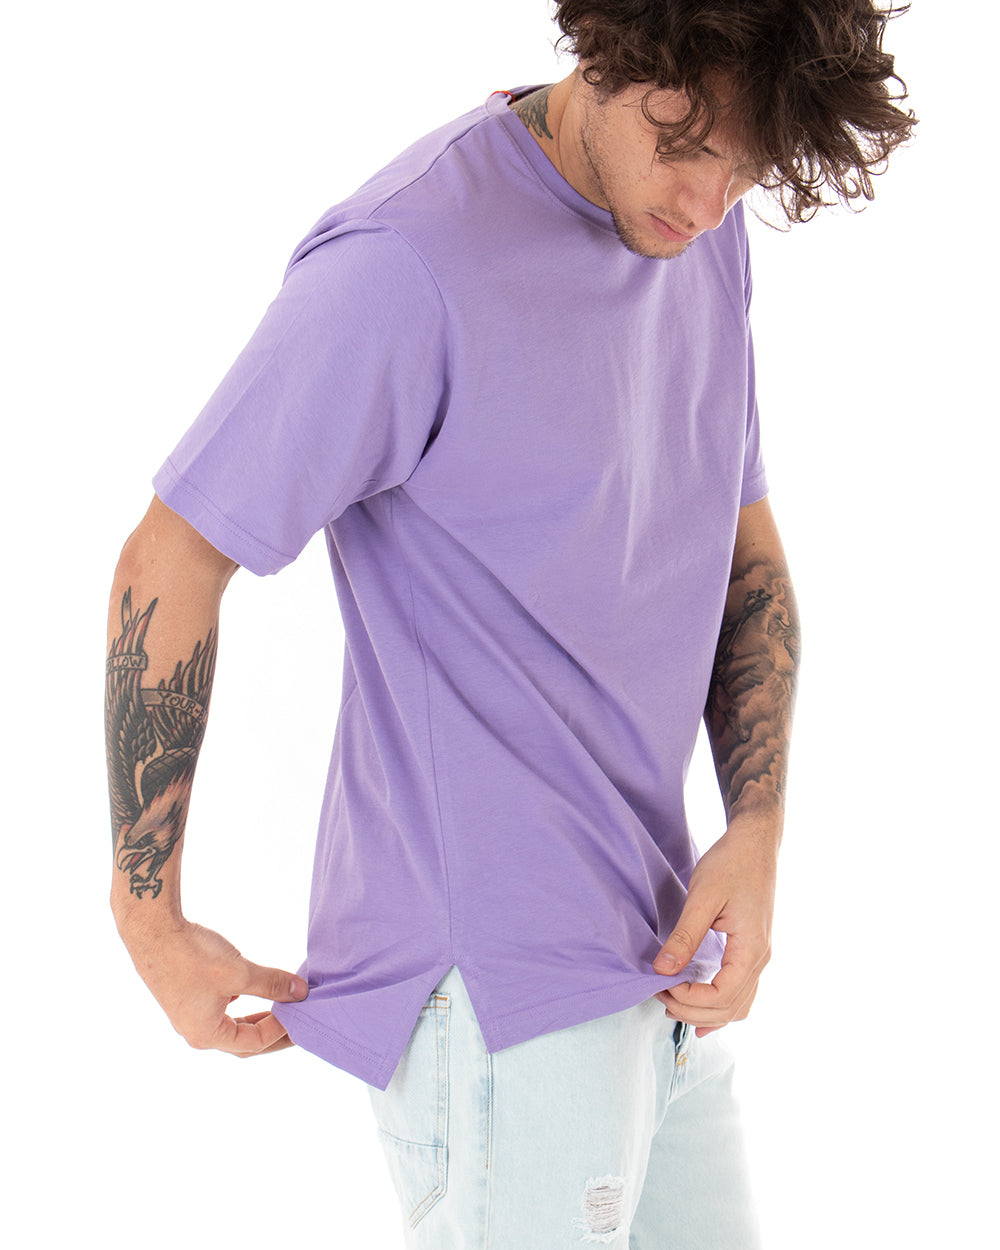 Basic Men's T-shirt Solid Color Lilac Crew Neck Short Sleeve Casual Slits GIOSAL-TS2939A